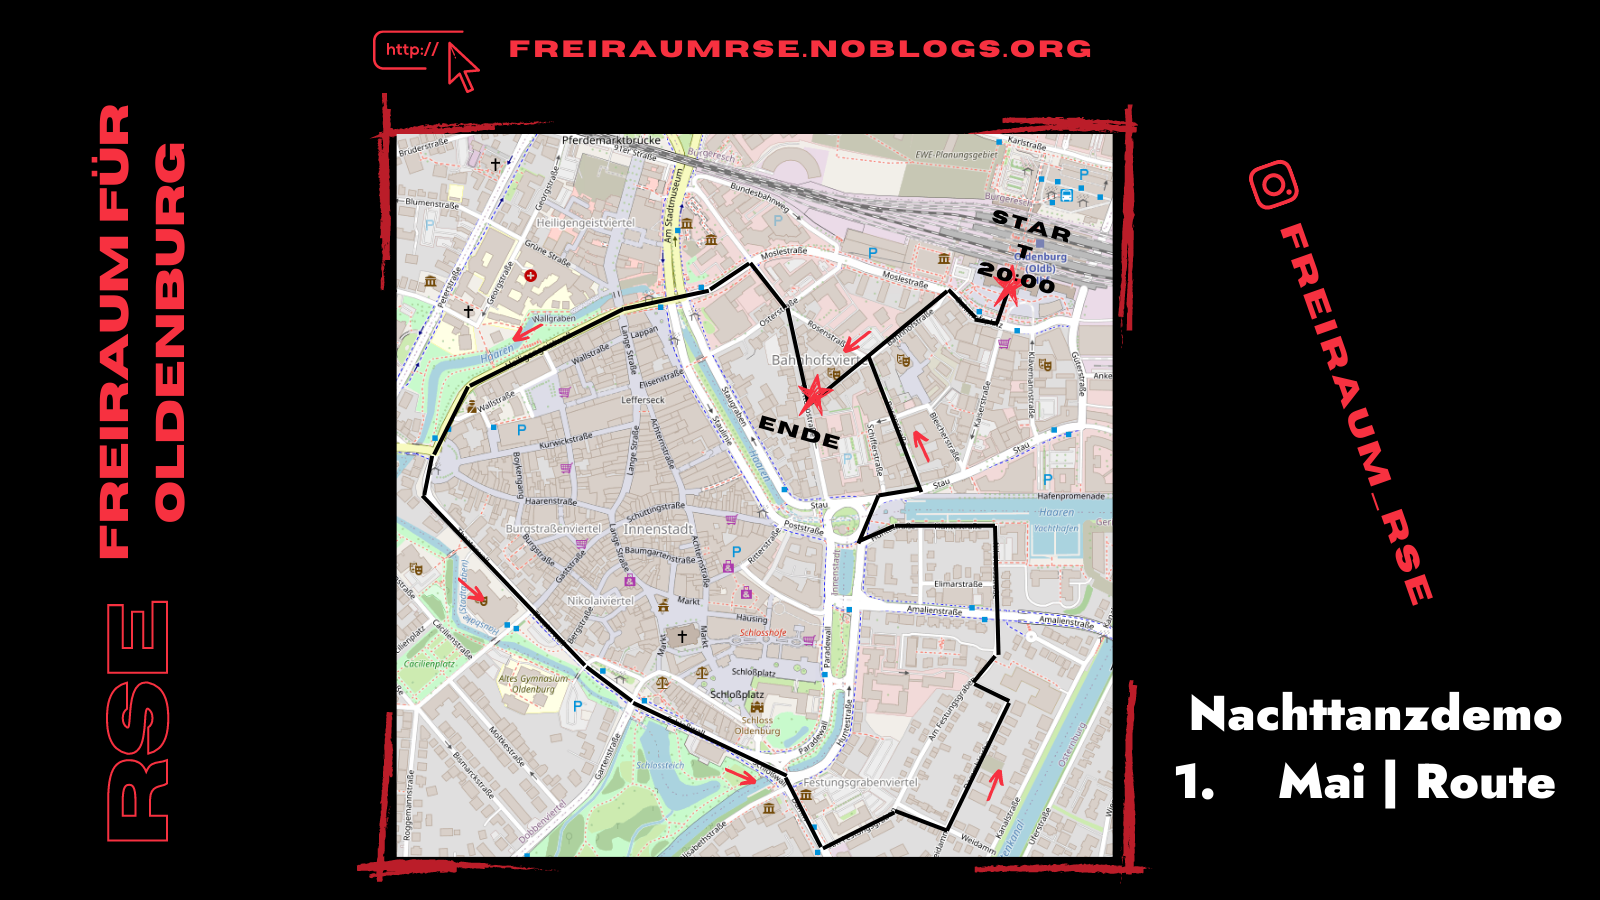 1. Mai Route, Mobivideo und Flyer